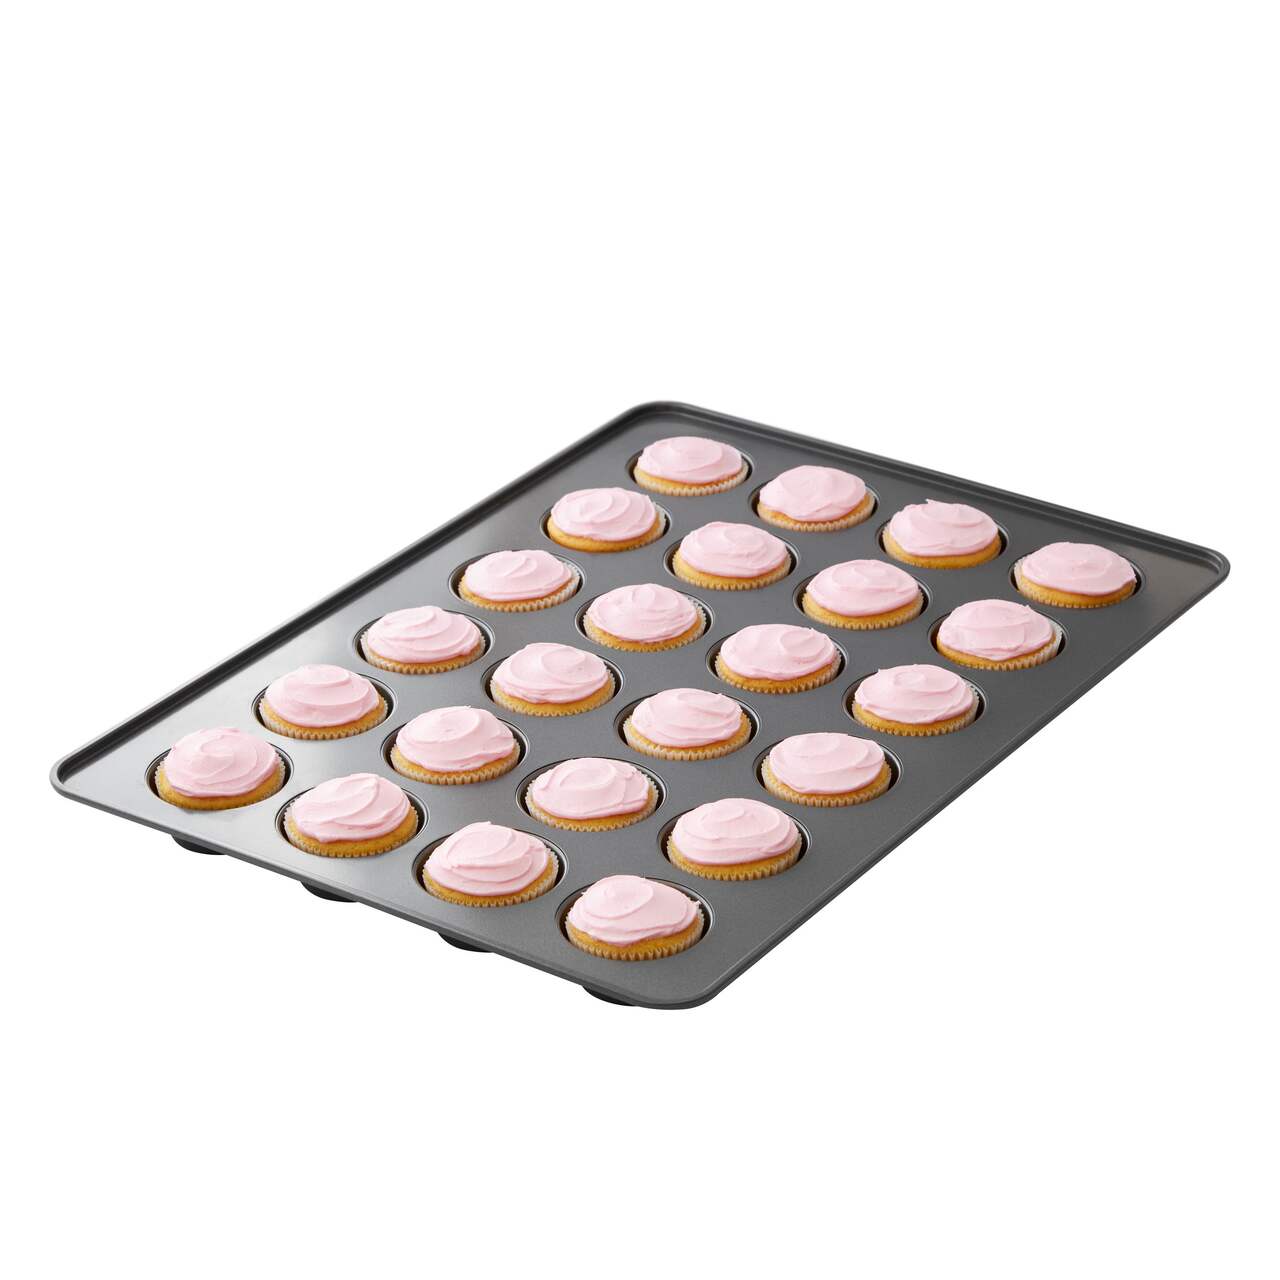 https://media-www.canadiantire.ca/product/living/kitchen/bakeware-baking-prep/1429066/wilton-mega-24-cup-muffin-pan-3dbe41a9-4440-4345-9b8c-0429ed4842ea-jpgrendition.jpg?imdensity=1&imwidth=1244&impolicy=mZoom